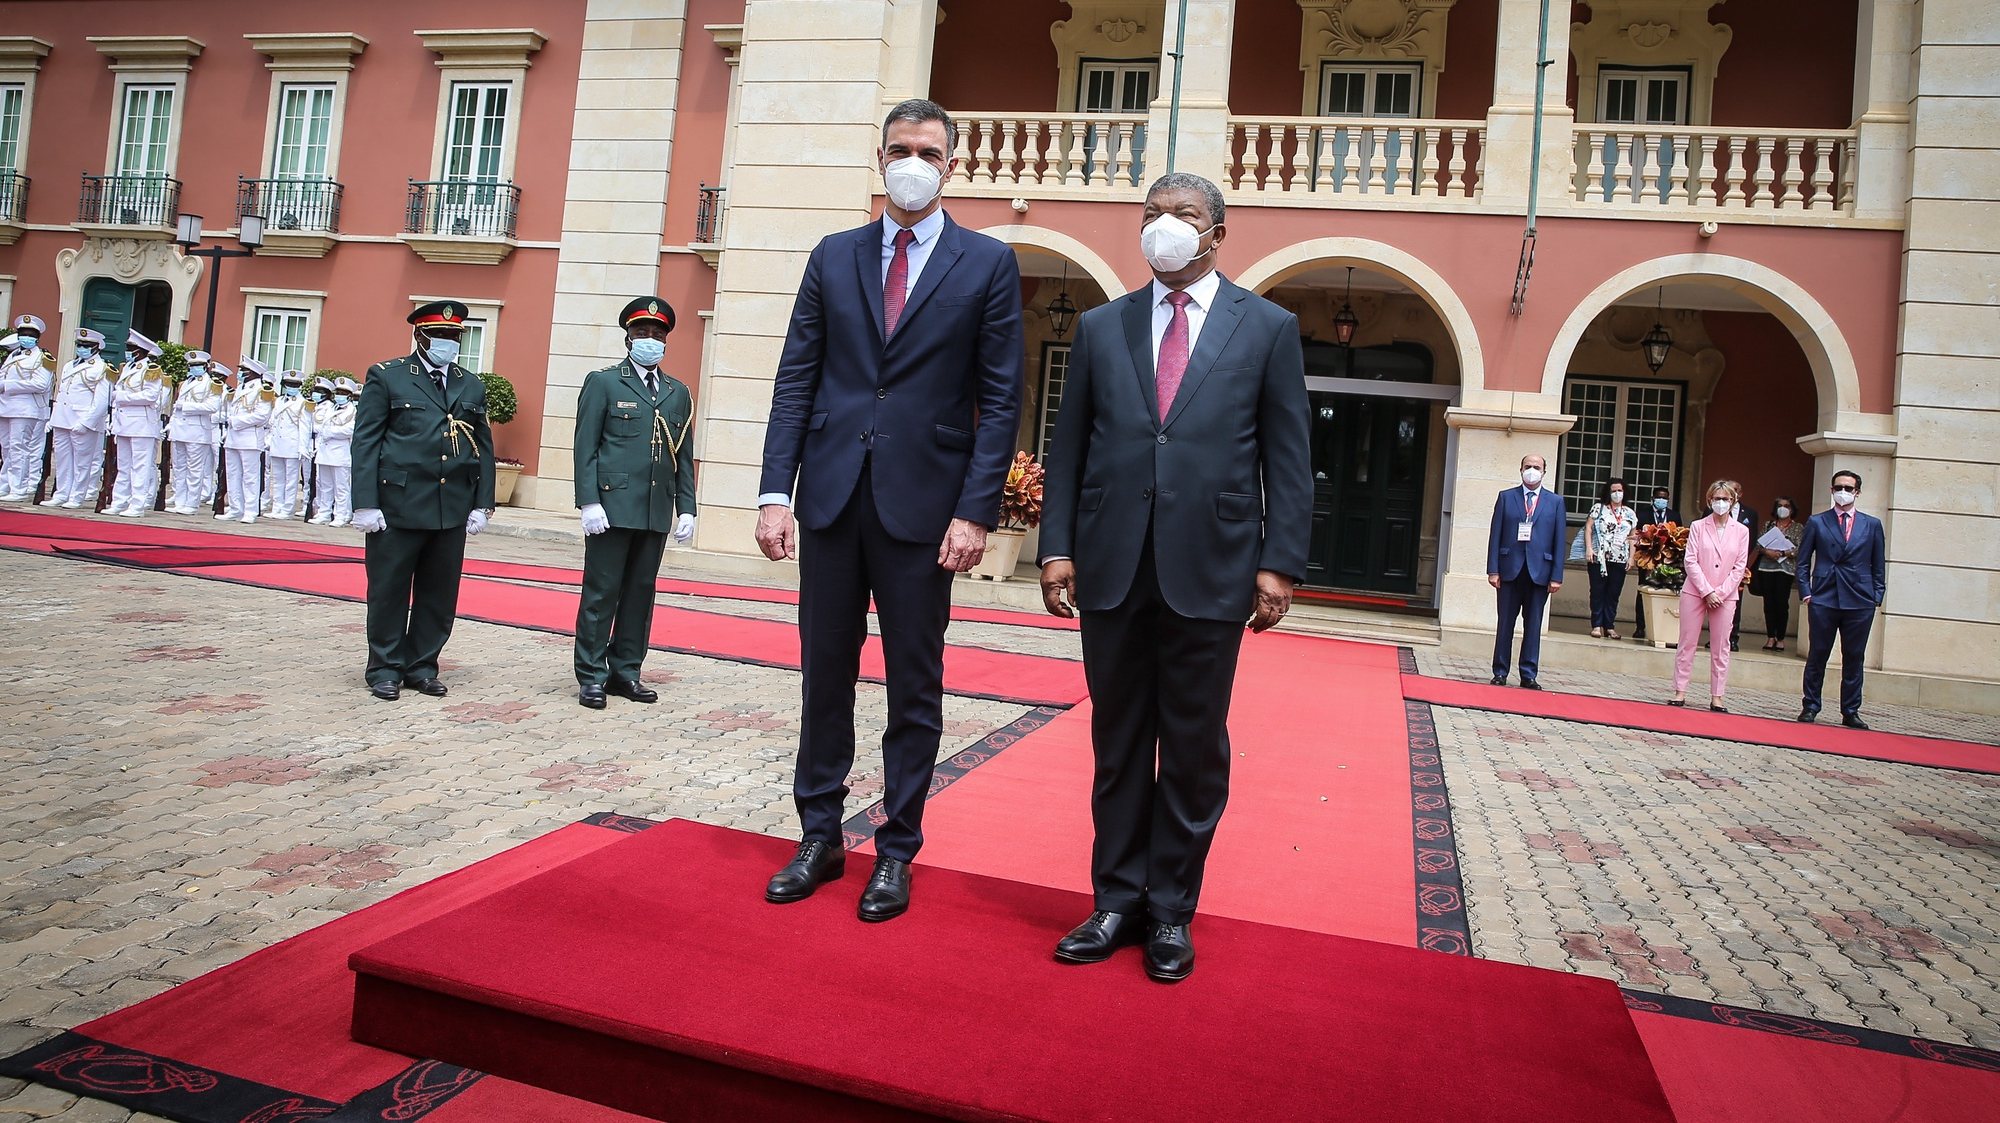 Spanish Prime Minister, Pedro Sanchez (L), flanked by Angola President, Joao Lourenço (R), at his arrival to the Presidential Palace during his official visit to Angola, Luanda, 8th April 2021. AMPE ROGERIO/LUSA